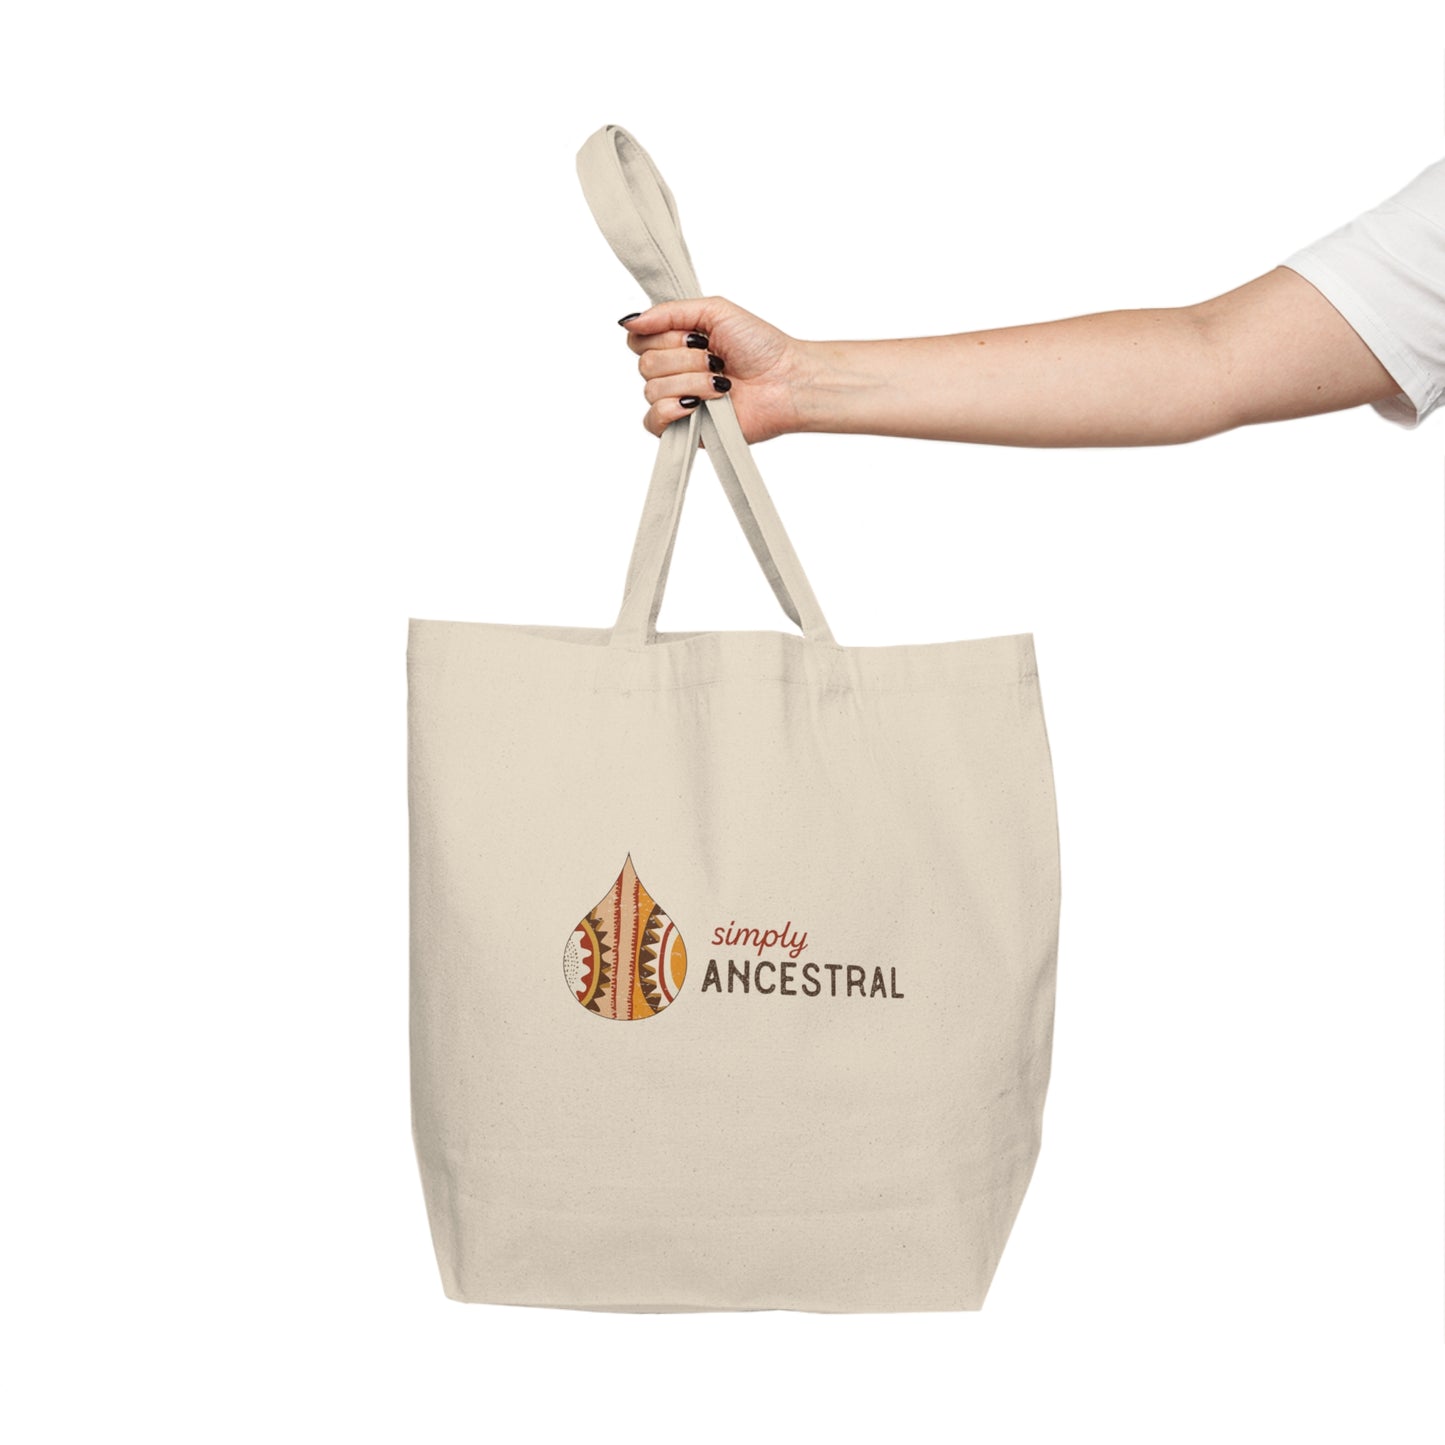 Simply Ancestral Canvas Tote